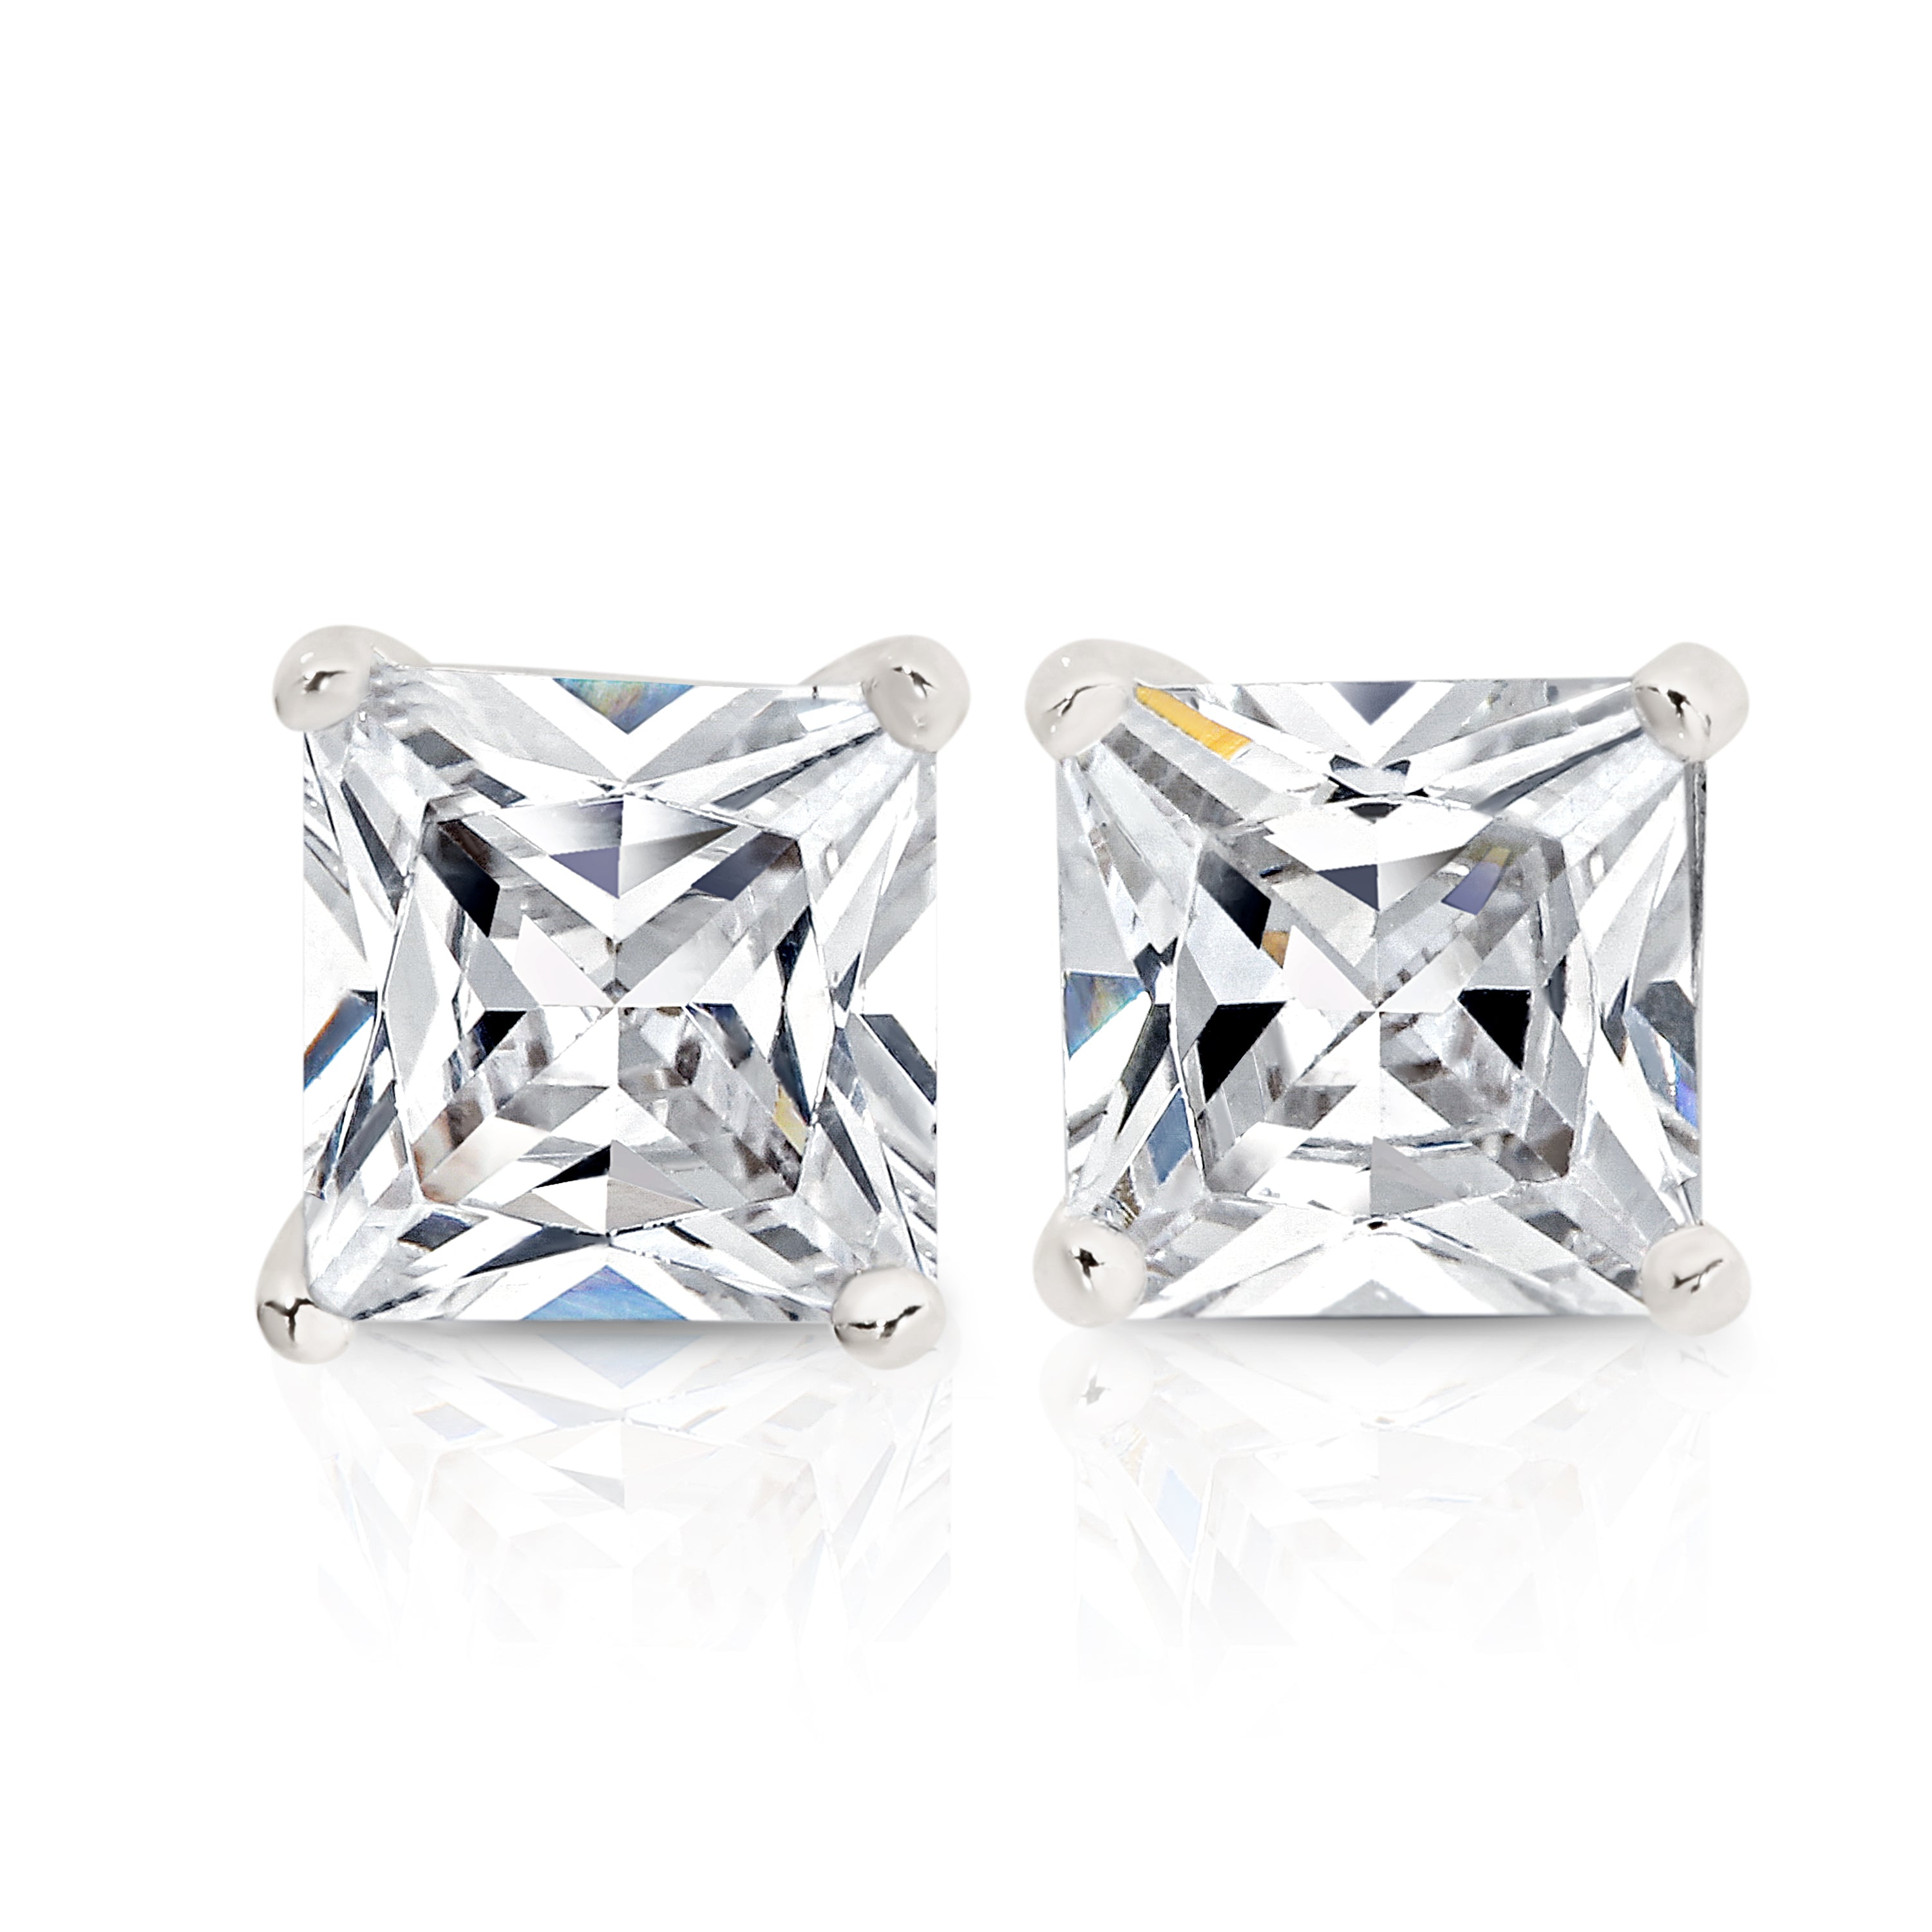 Silver square cubic zirconia studs 6mm